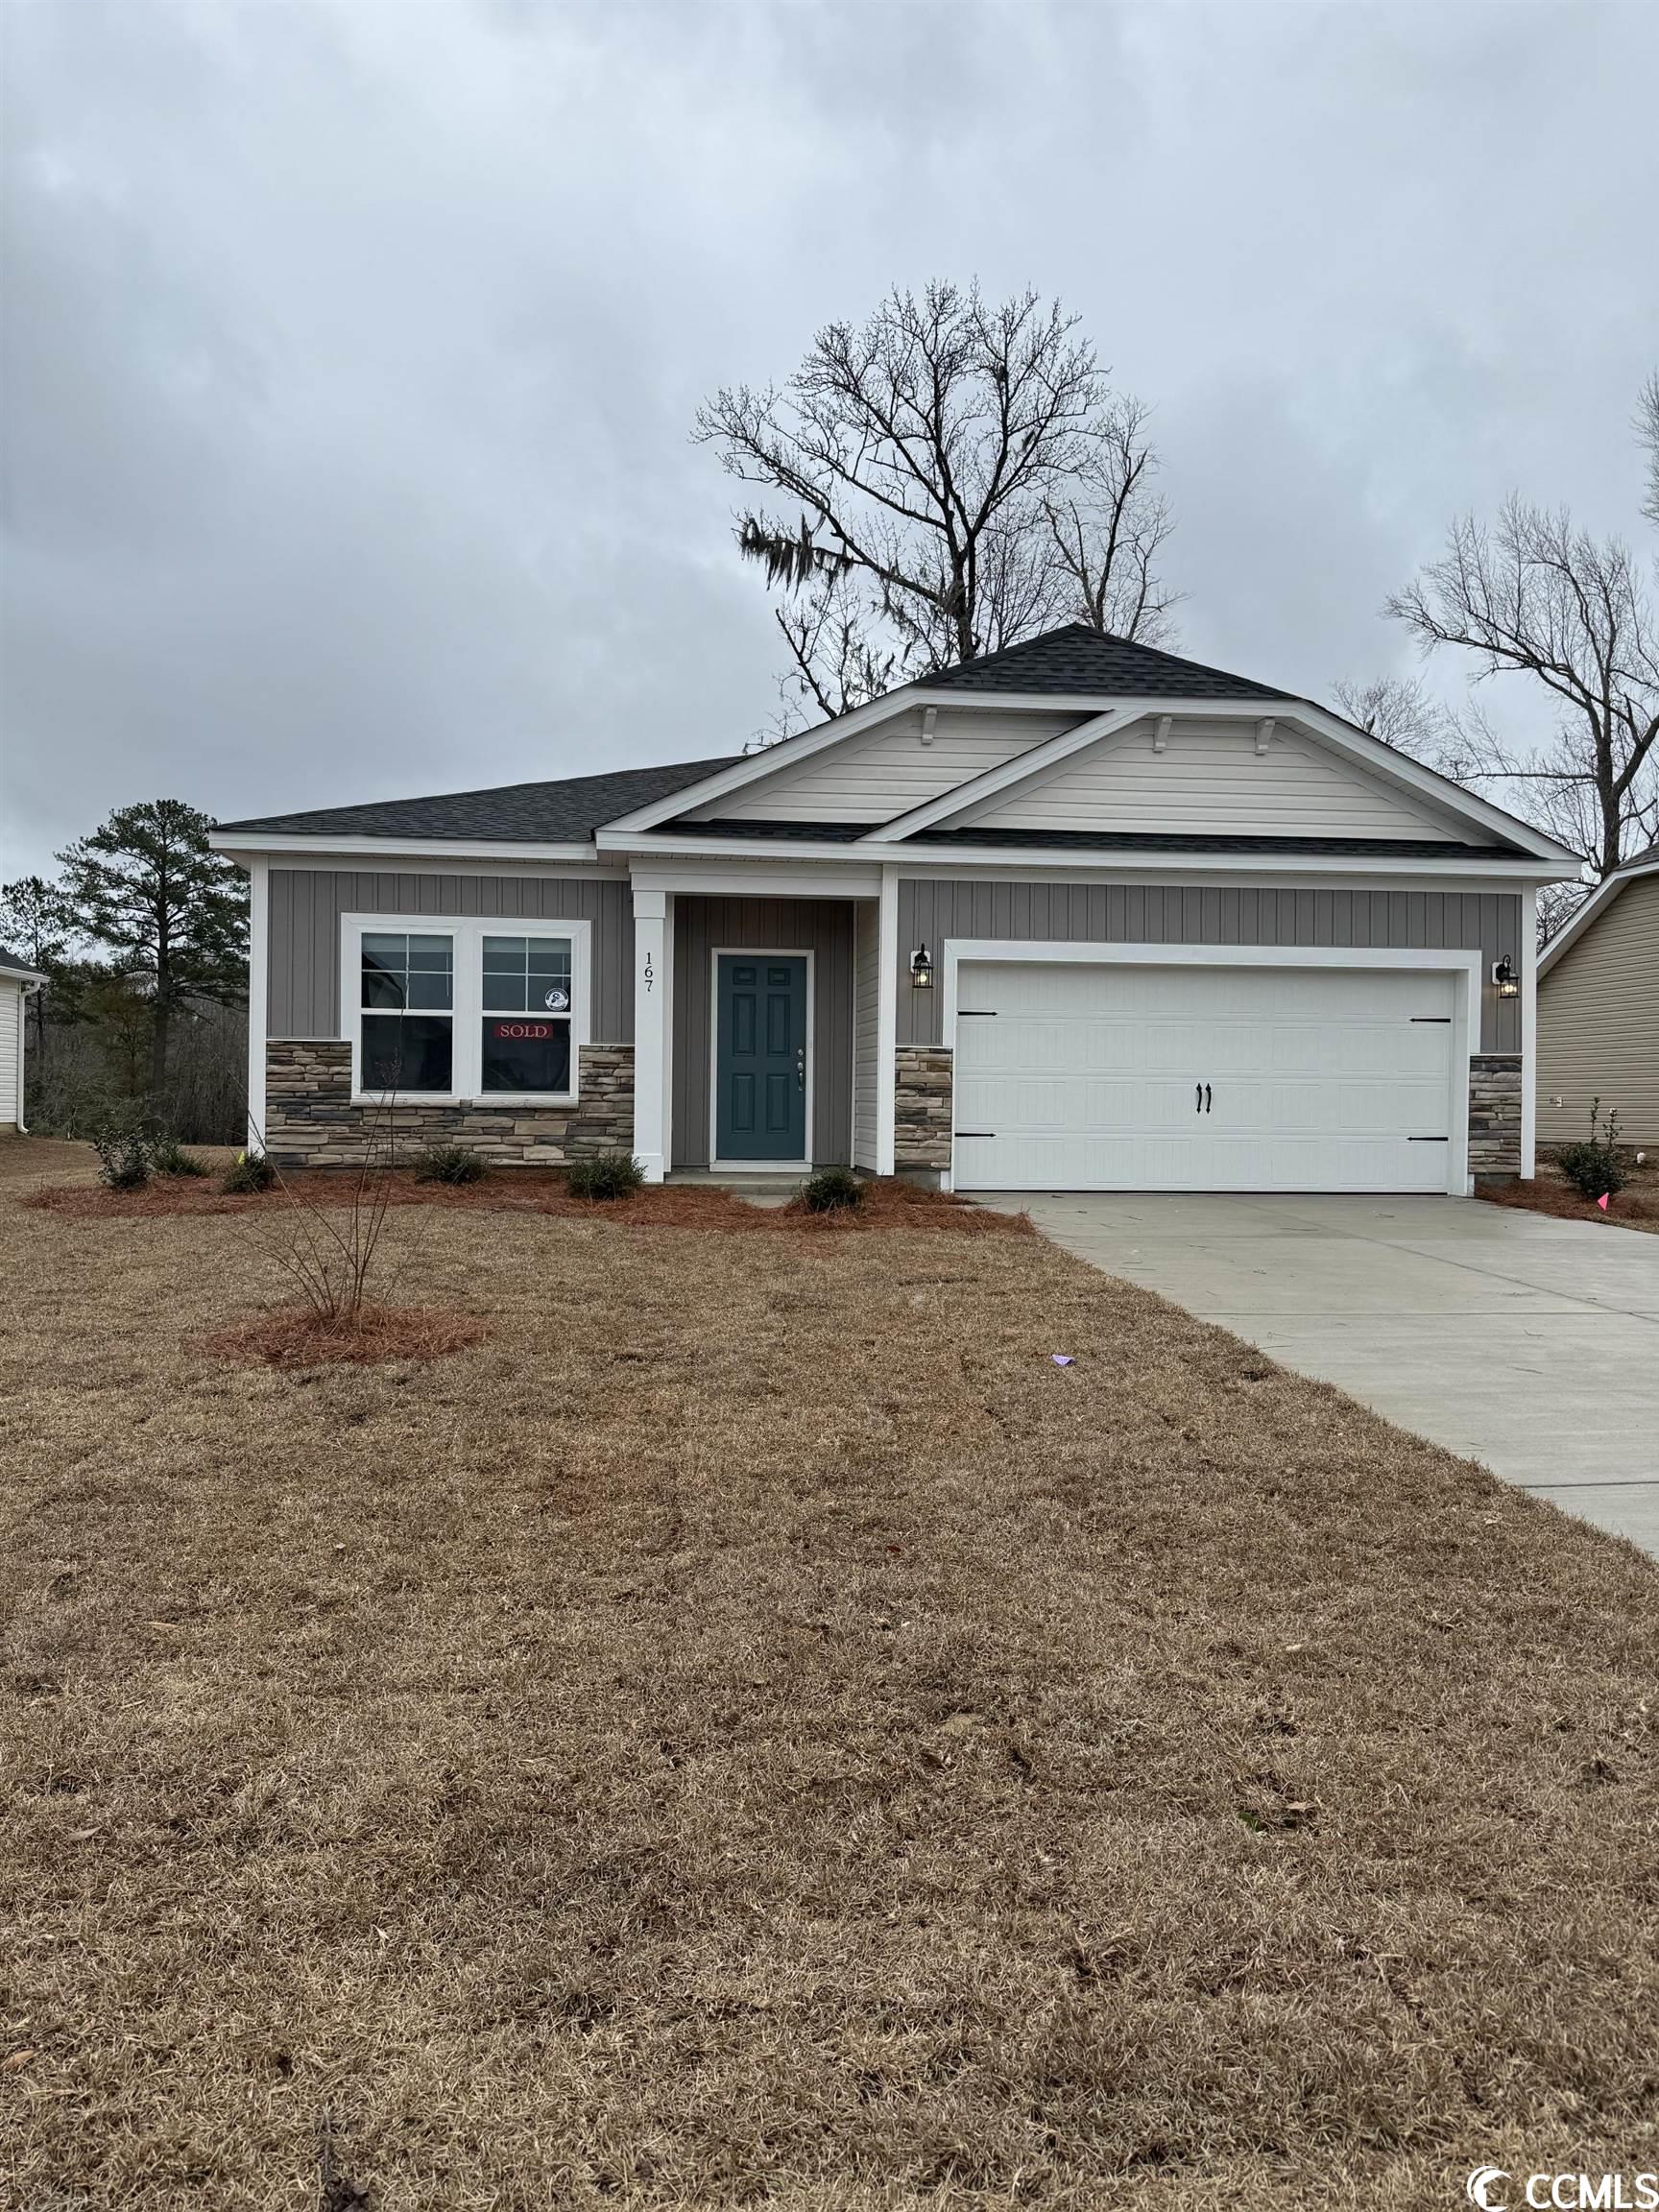 167 Grissett Lake Dr. Conway, SC 29526